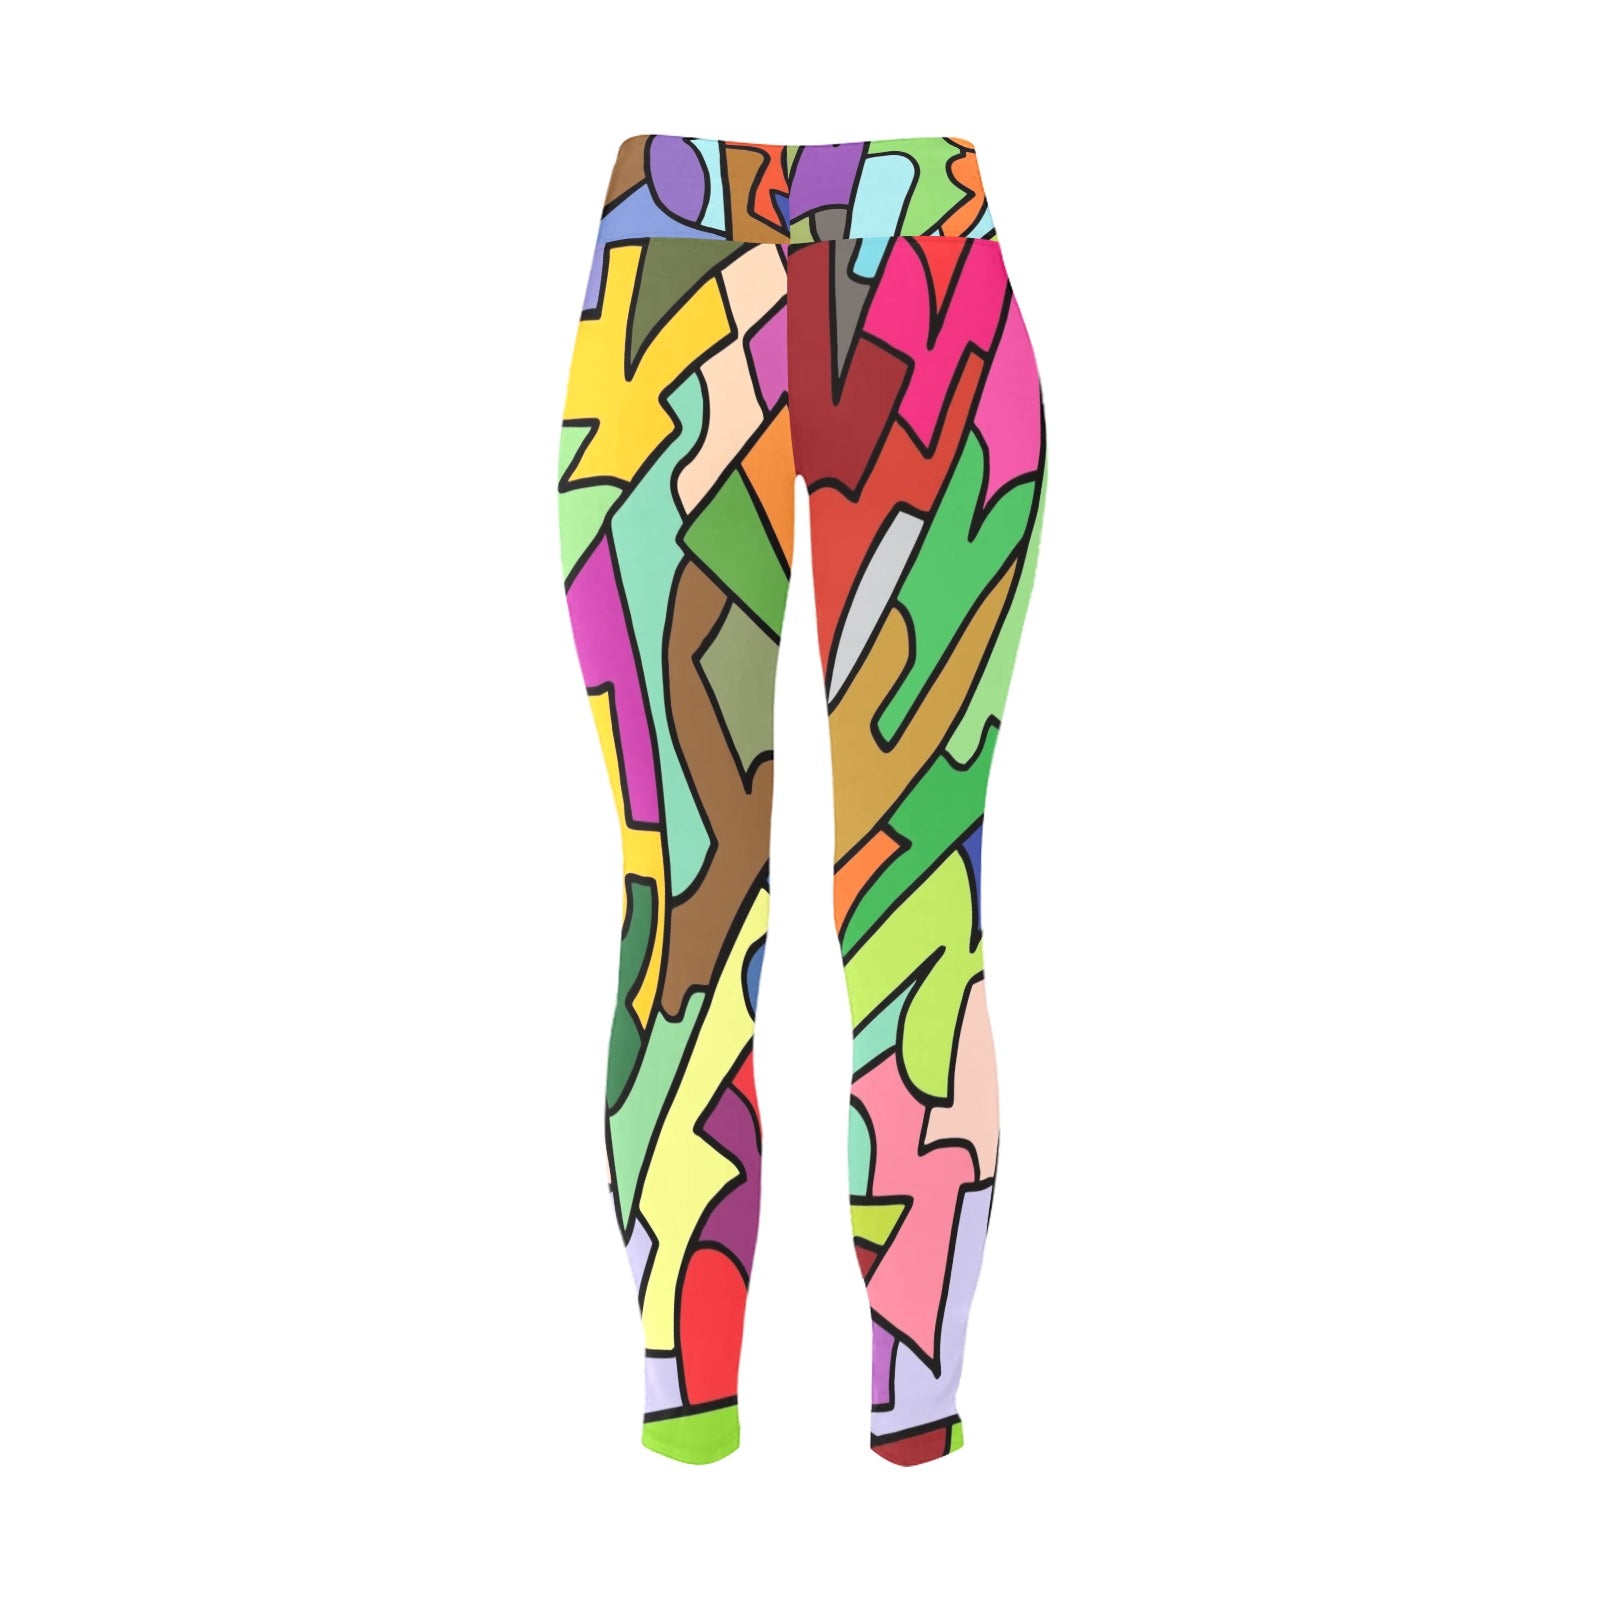 Bright Abstract - Women's Plus Size High Waist Leggings Women's Plus Size High Waist Leggings